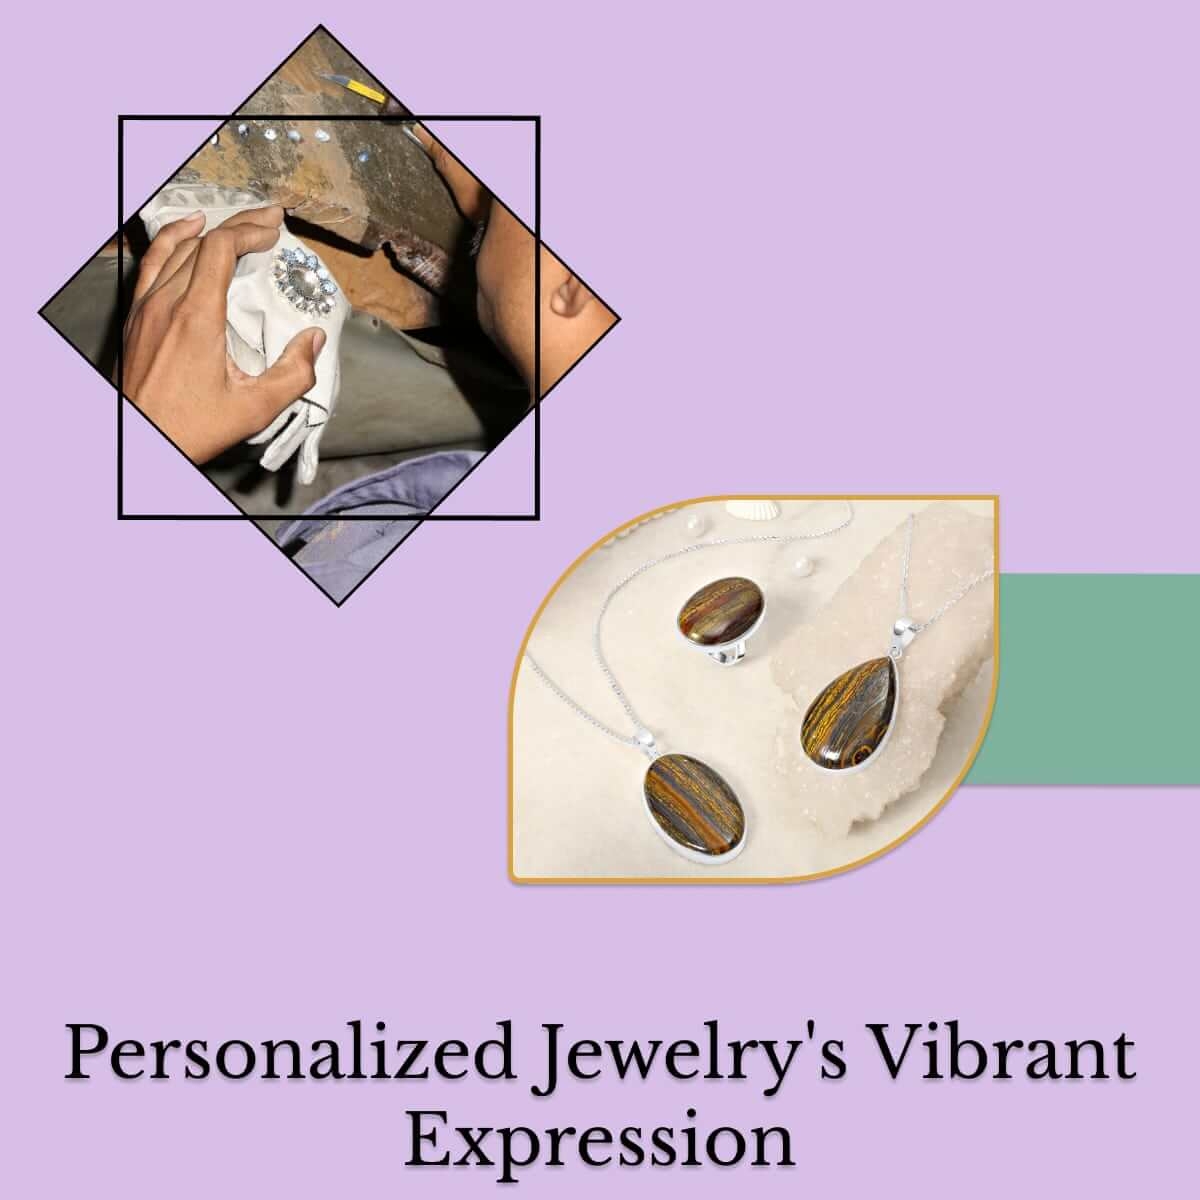 Personalized Jewelry: Give Life To Your Visions